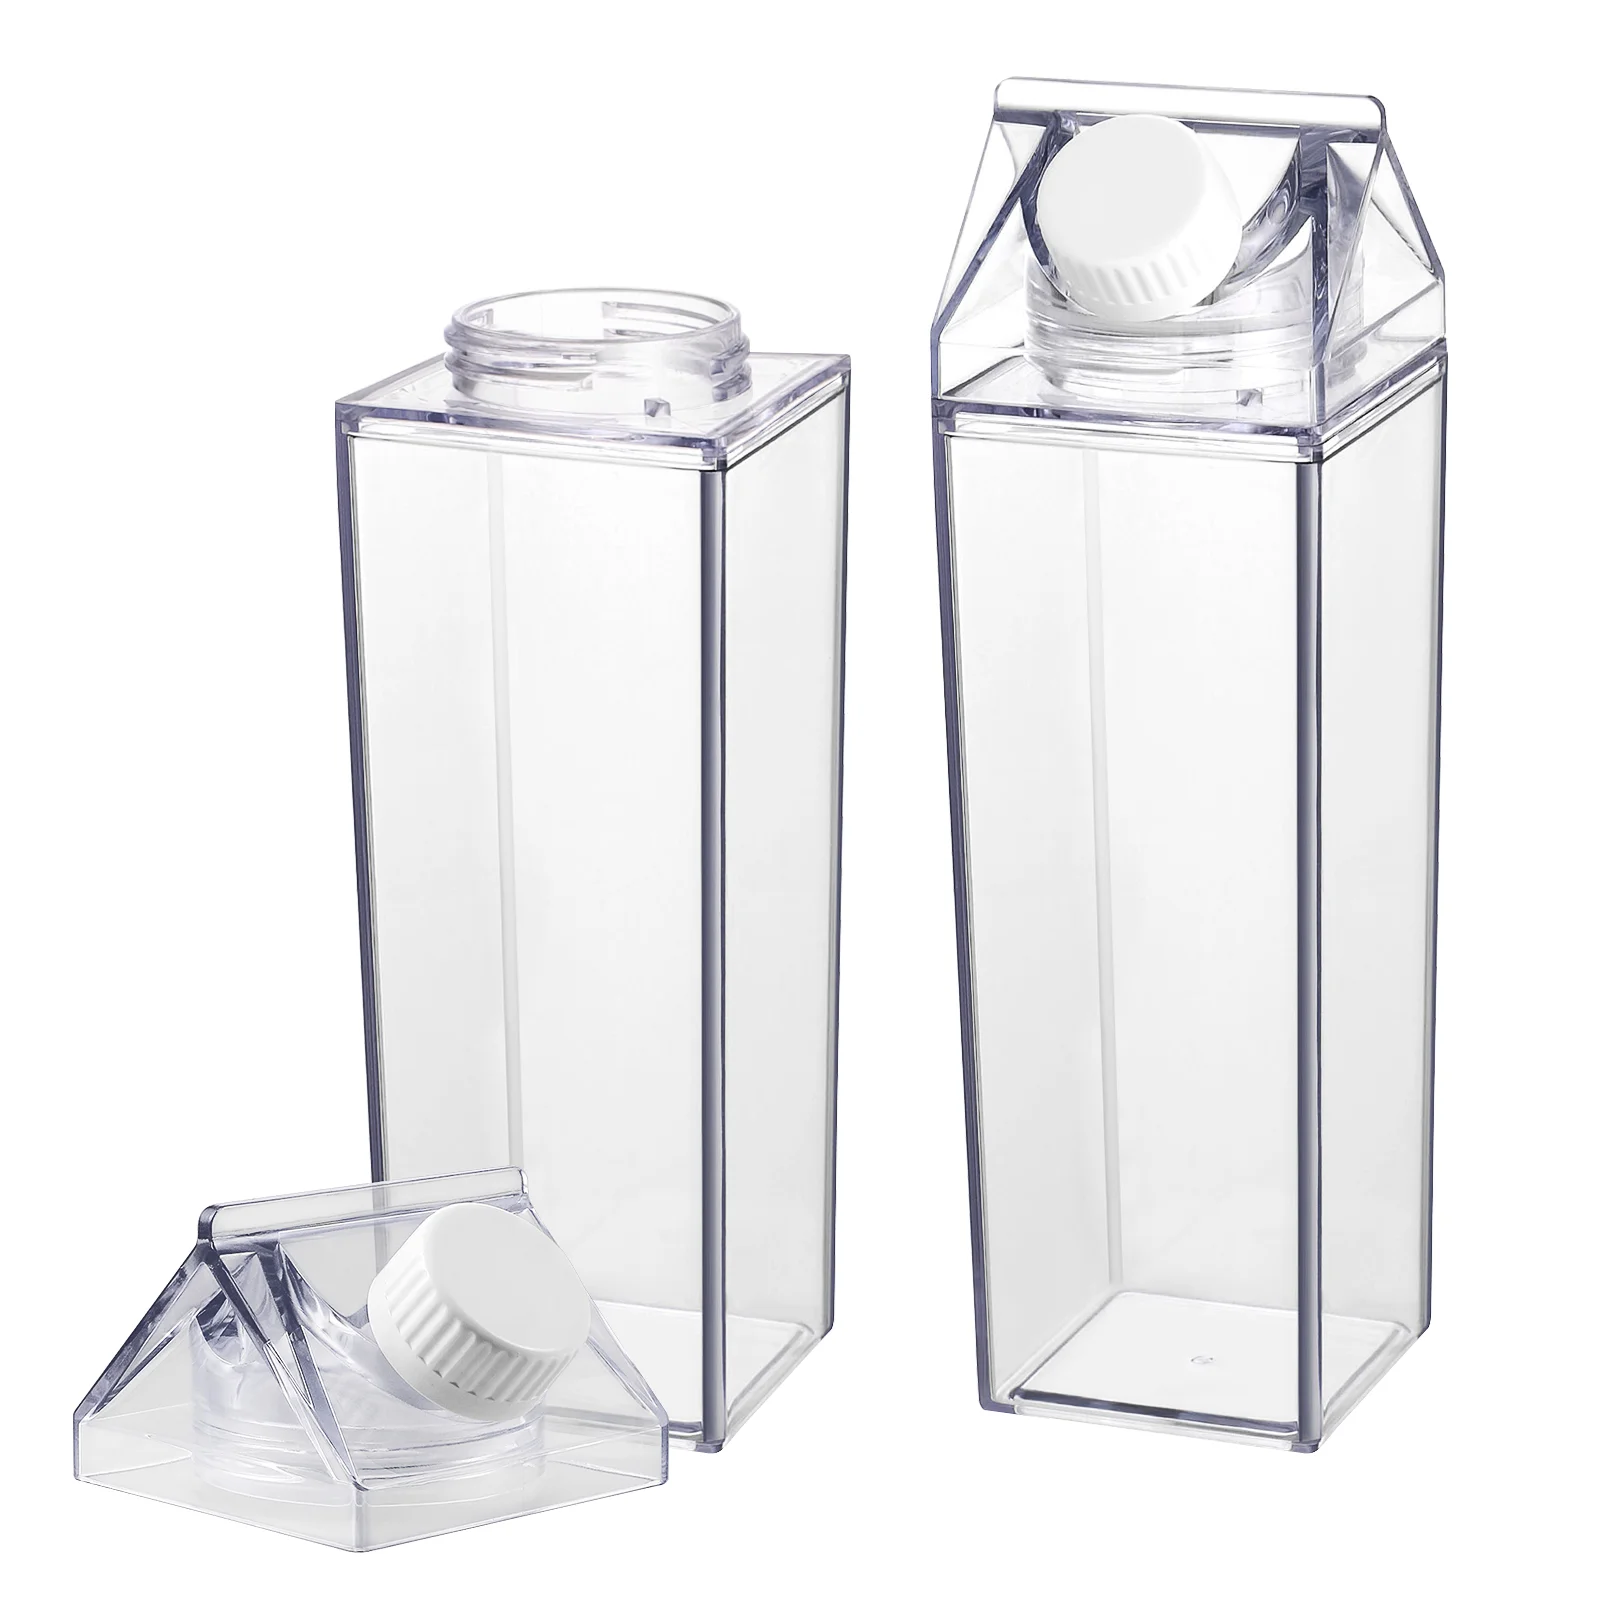 

Cabilock 2pcs Clear Plastic Bottles 500ML Airtight Water Container Drink Bottle for Sports Camping Travel